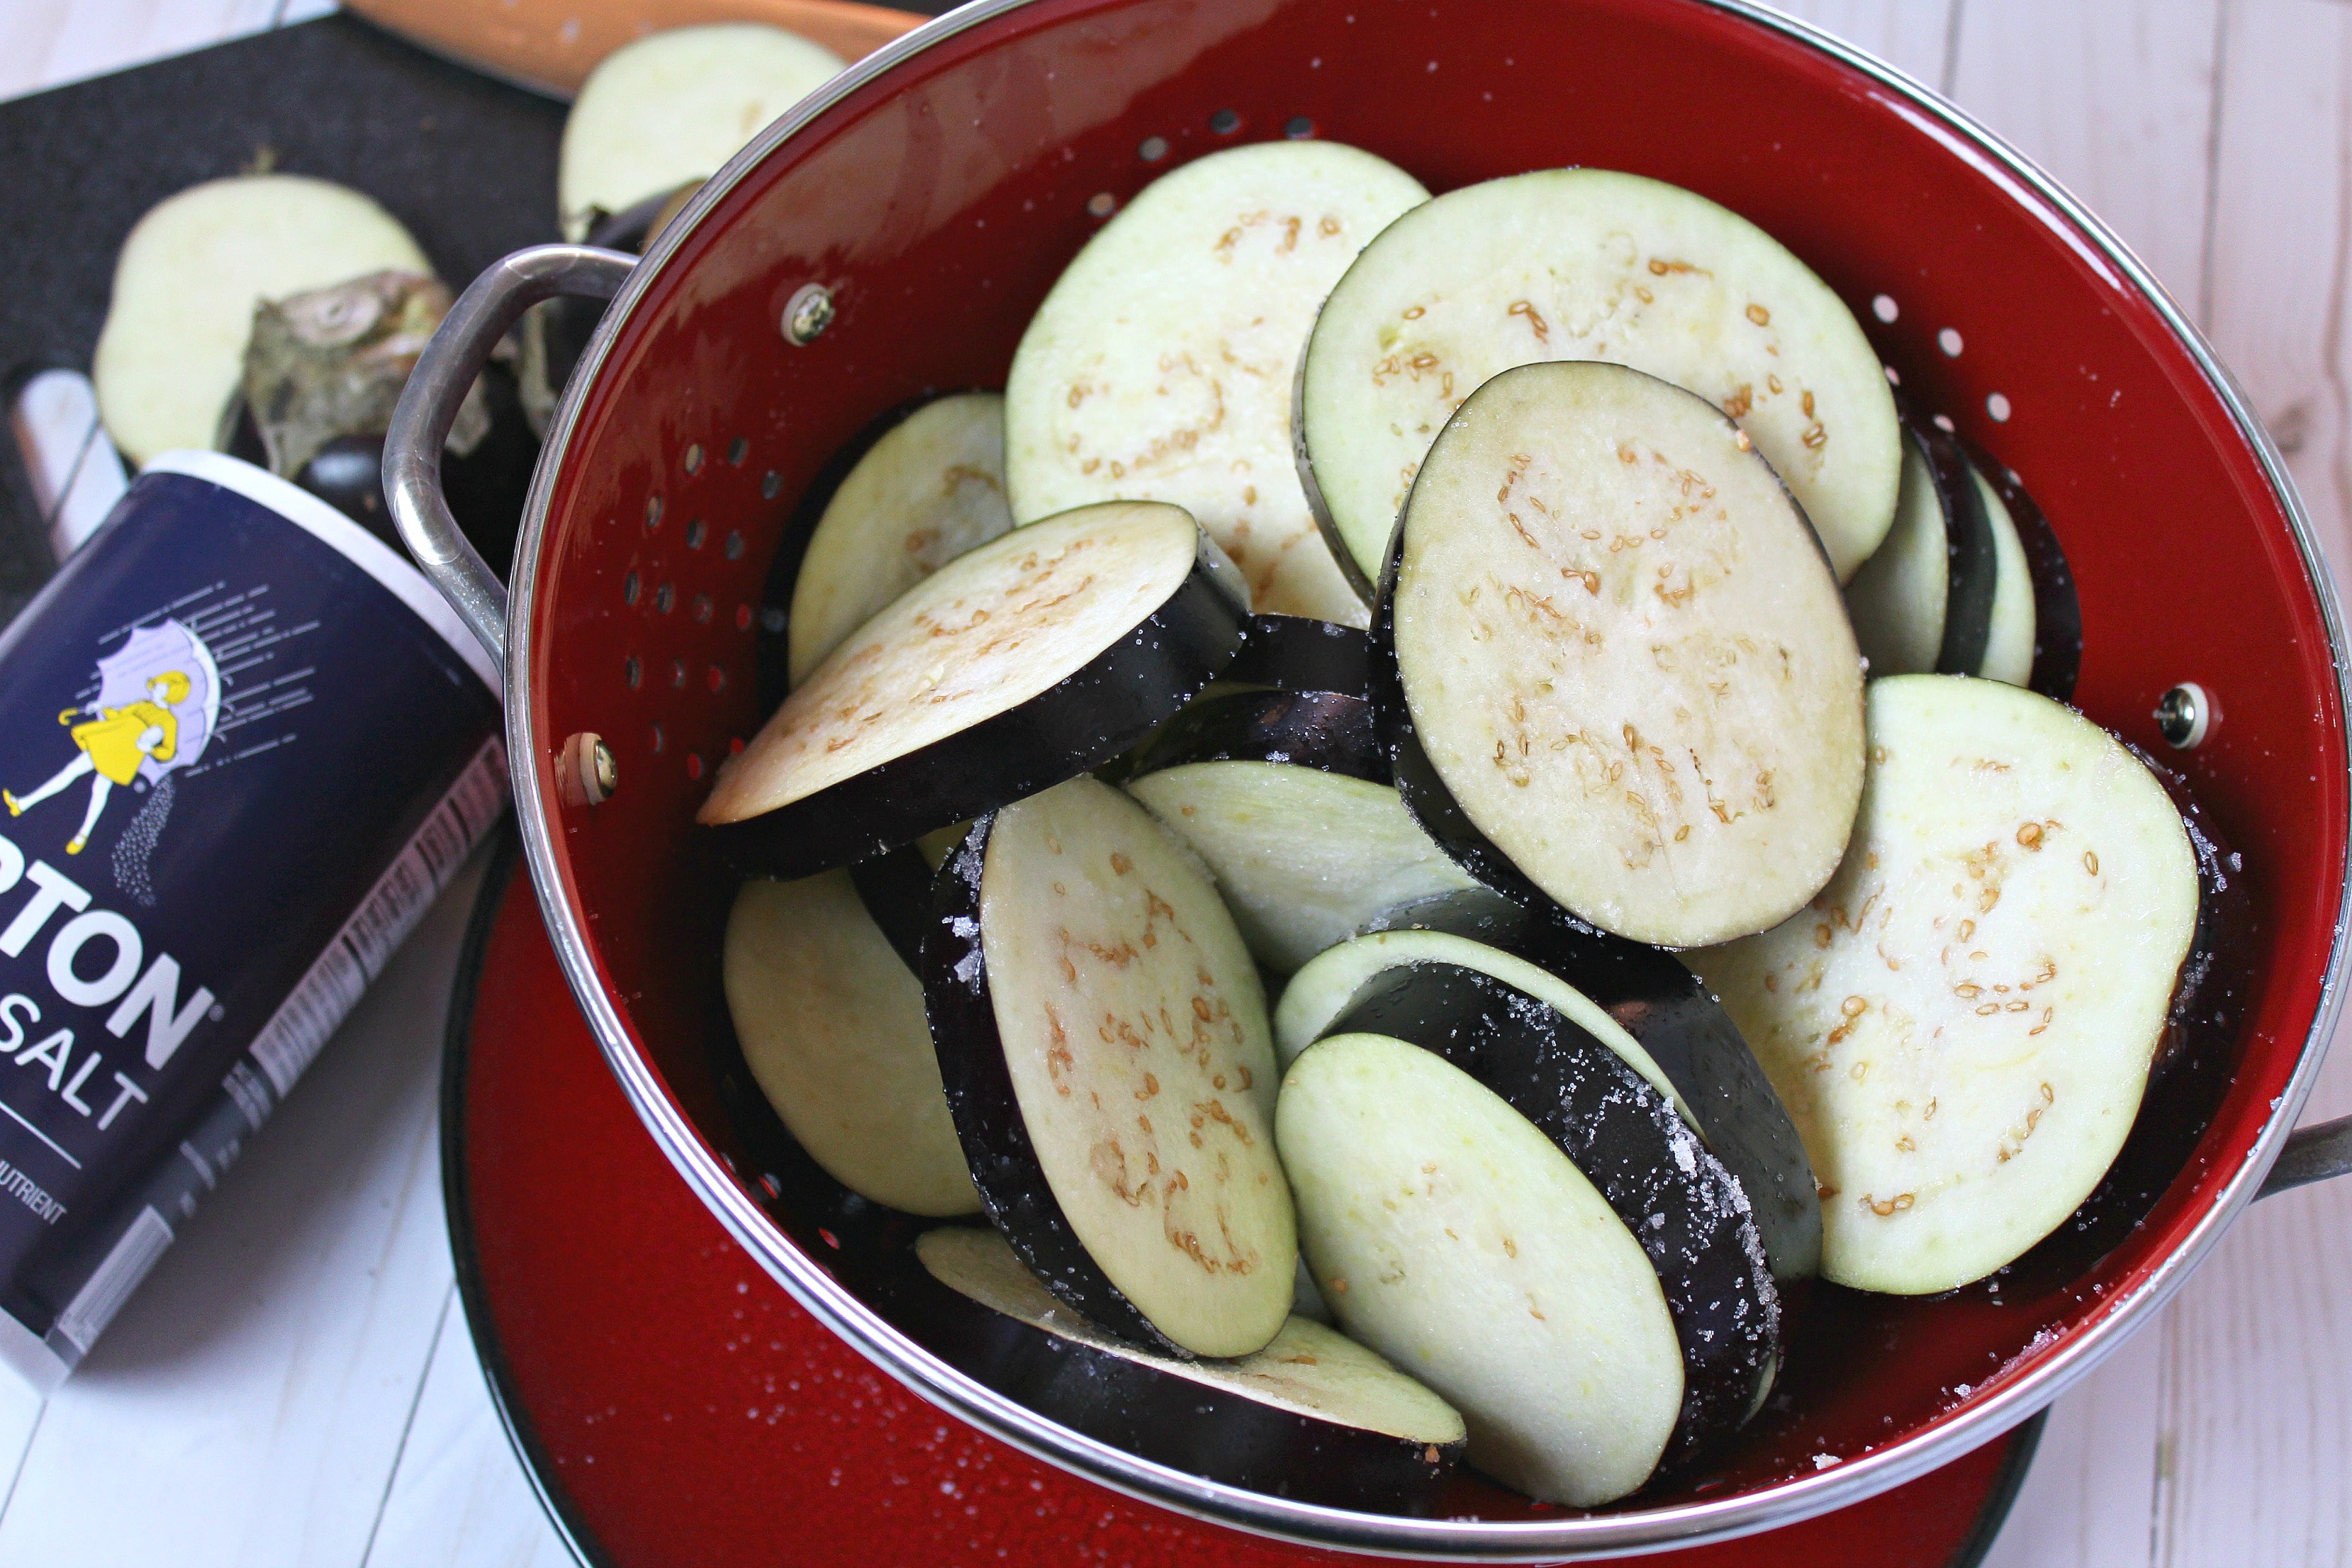 Place eggplant in a colander and sprinkle generously with salt.